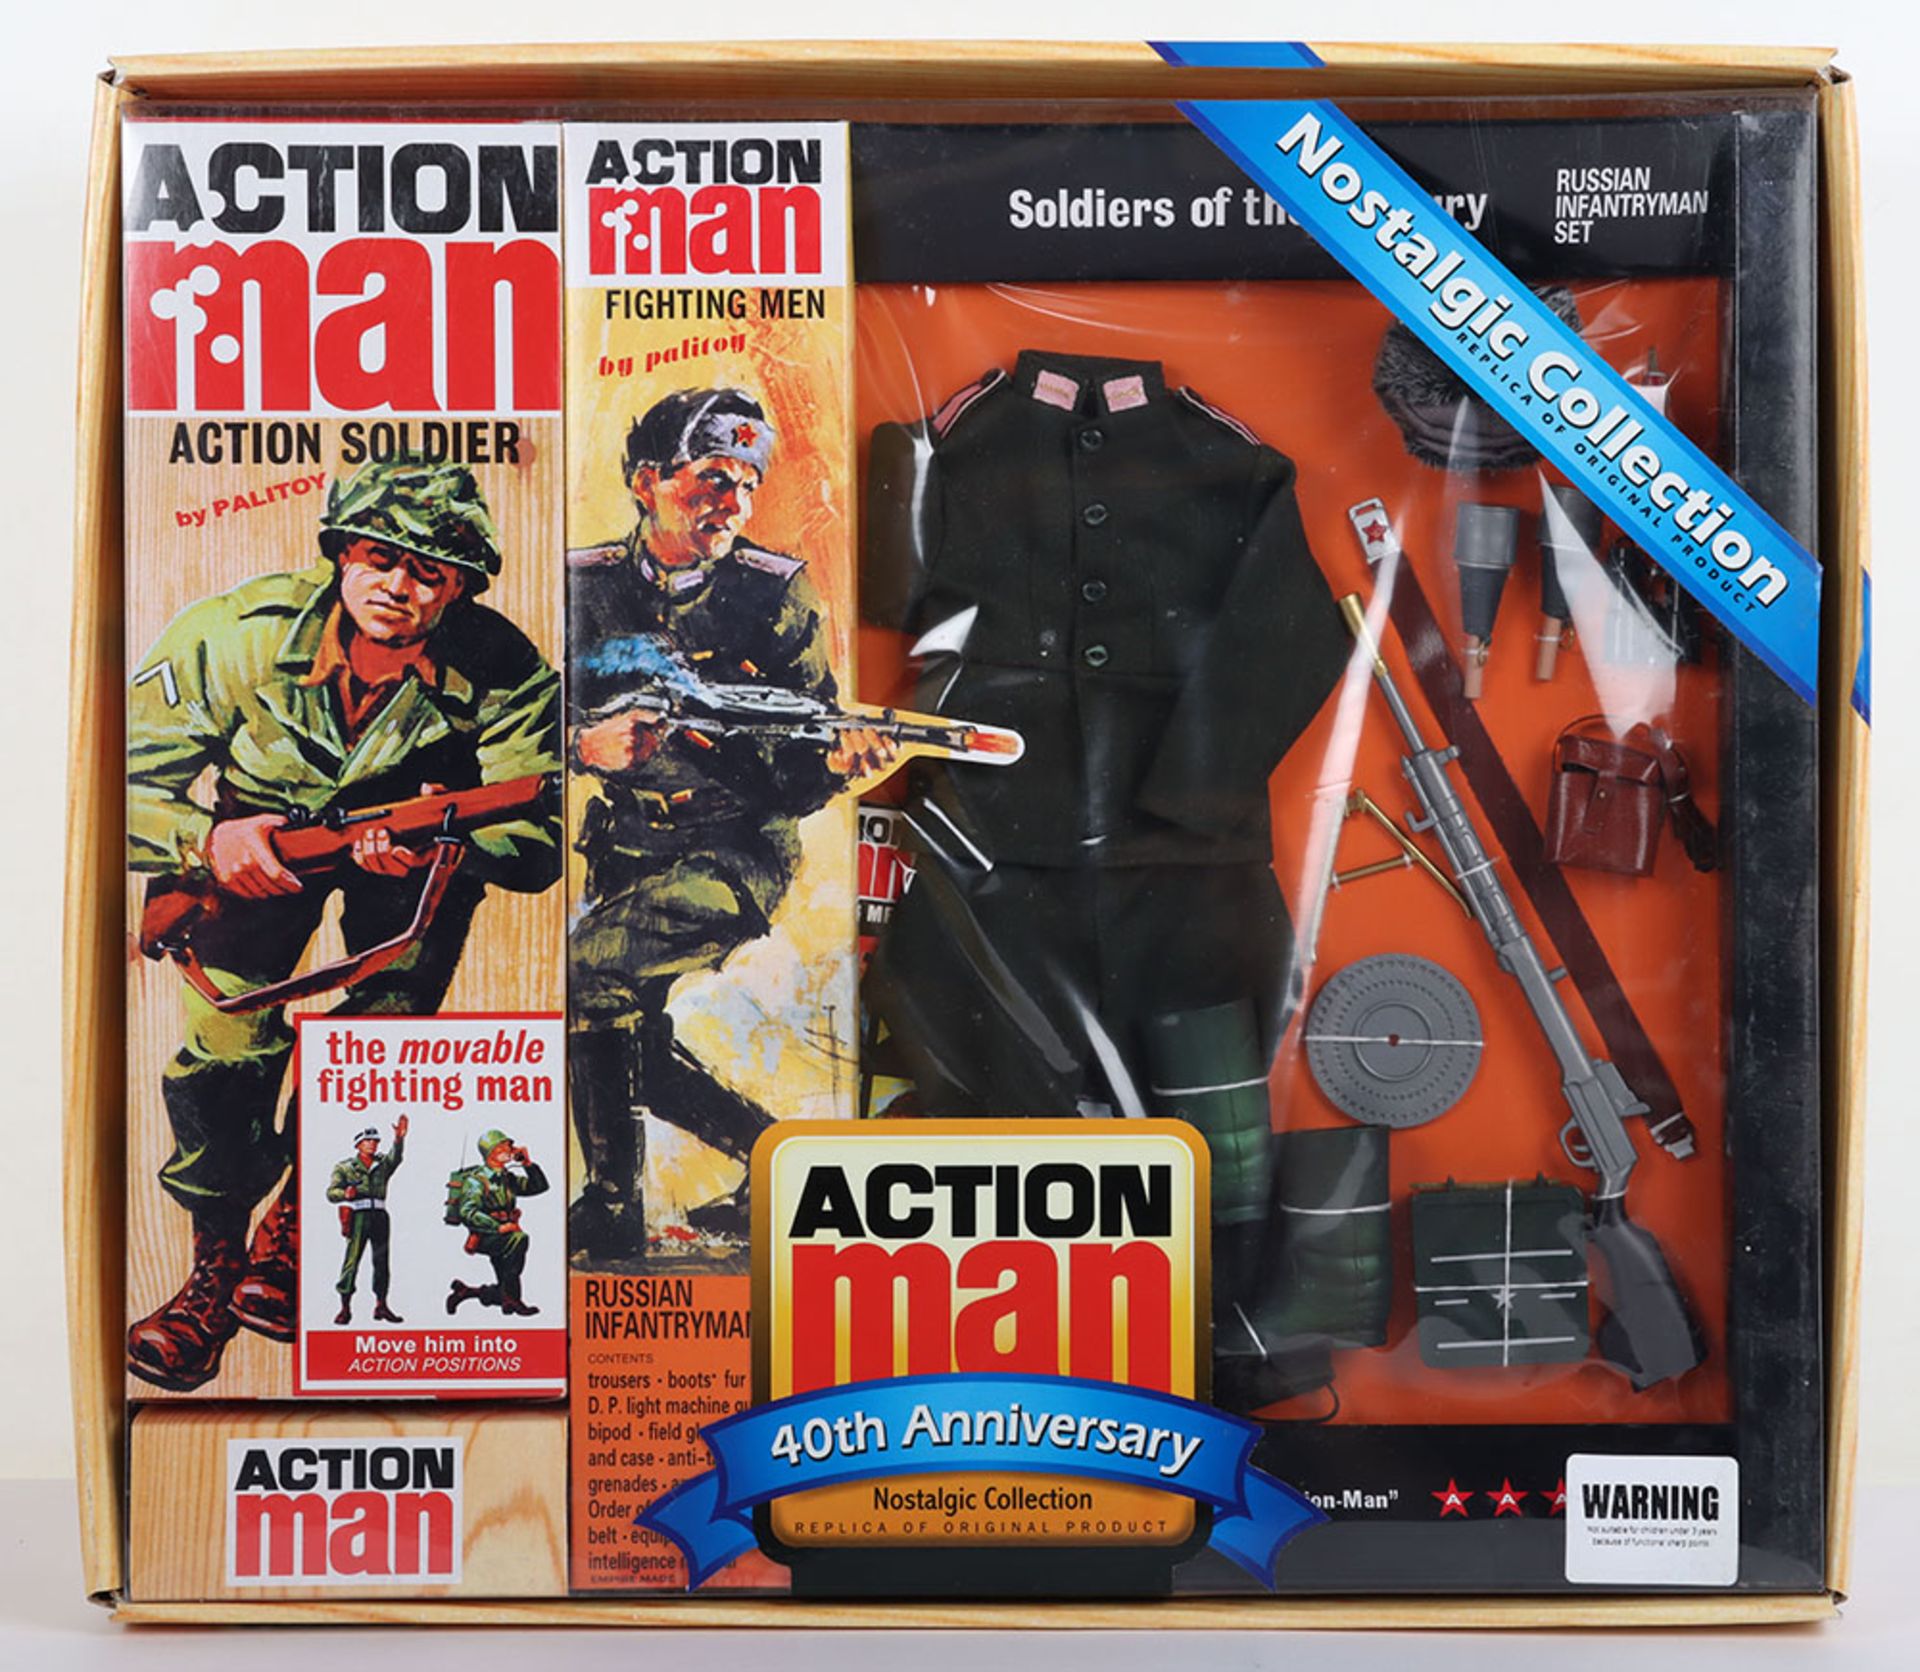 Action Man Palitoy Soldiers of the century French Russian Infantry set Outfit 40th Anniversary Nosta